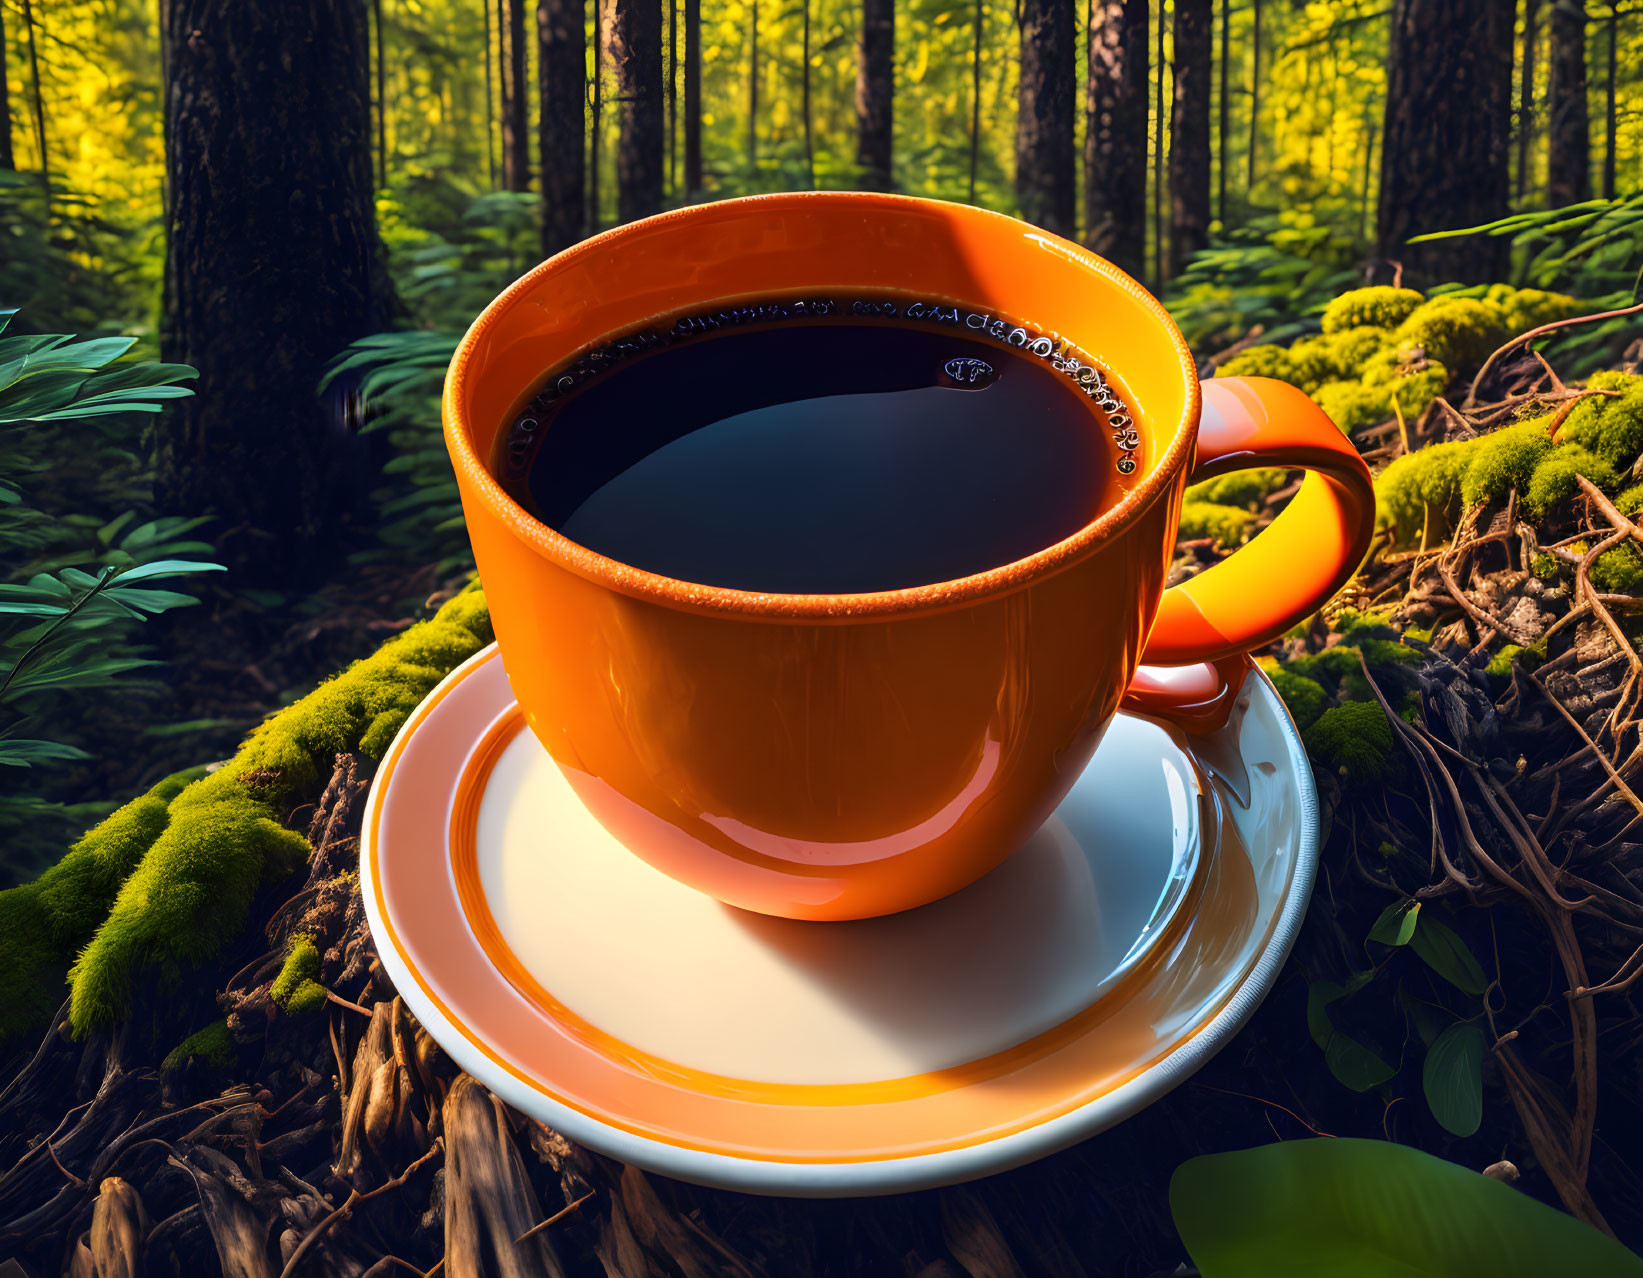 Giant orange coffee cup in lush forest with sunlight